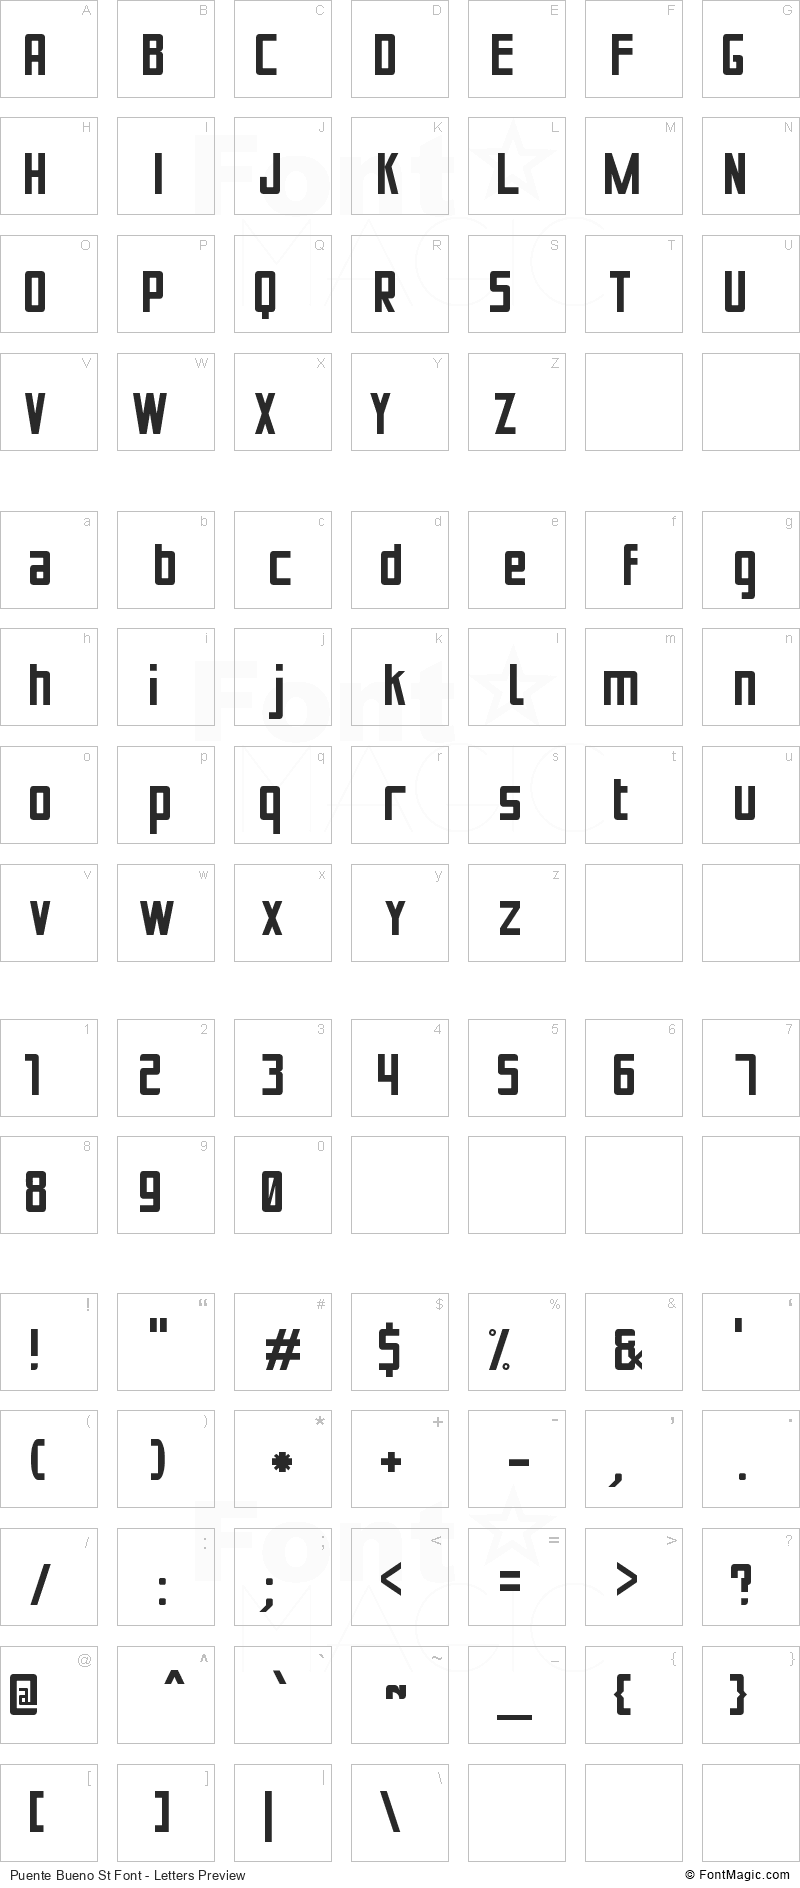 Puente Bueno St Font - All Latters Preview Chart